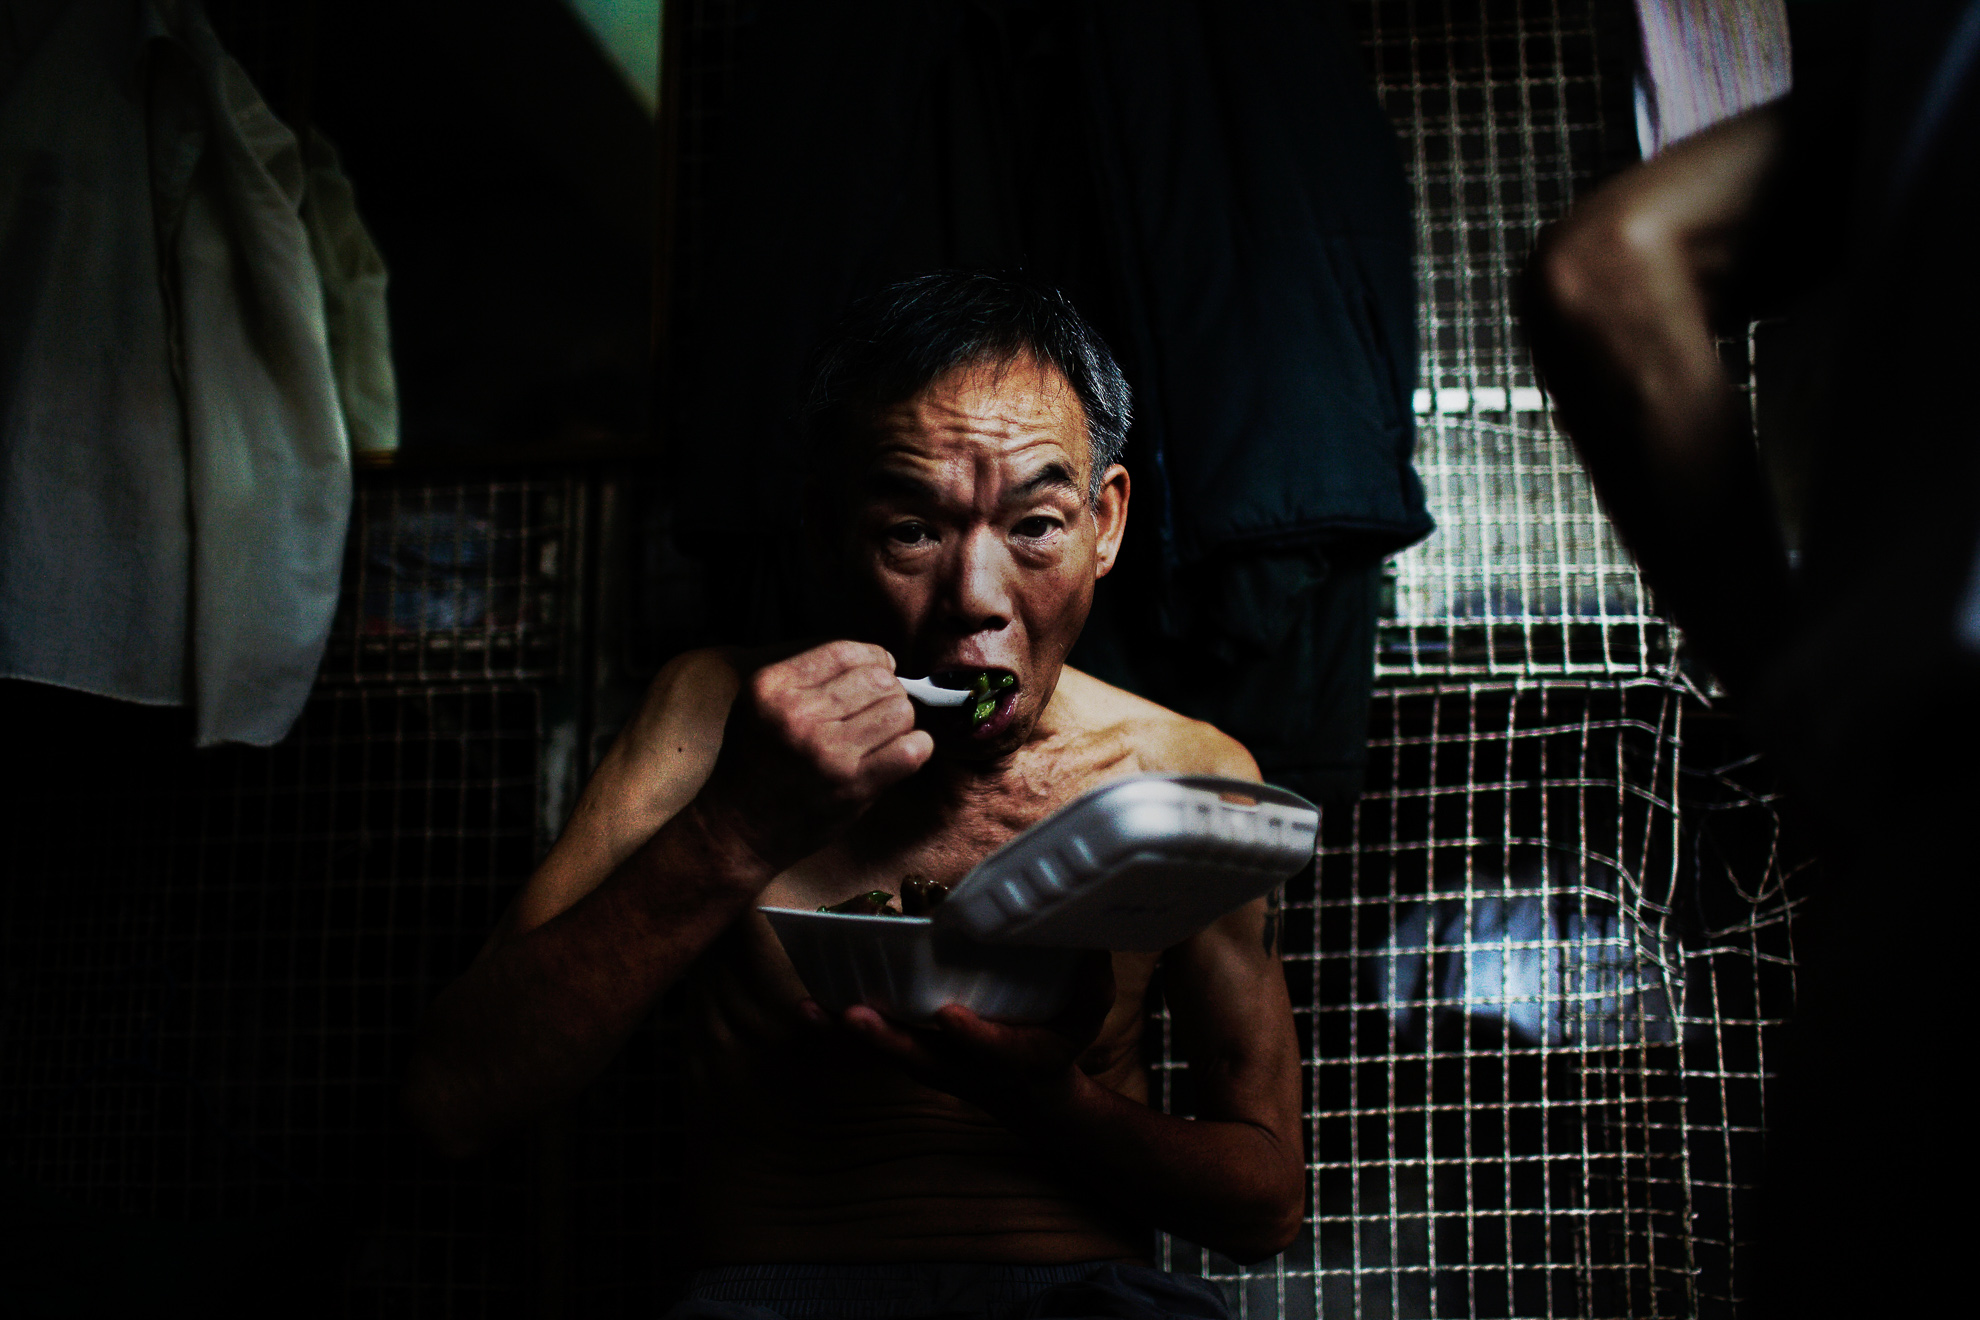 Kong Siu-kau eats in front of his small cage at the Hong Kong's Tai Kok Tsui district, July 16, 2008. In older districts such as Tai Kok Tsui, hundreds of elderly men still reside in caged cubicles in cramped, old tenement flats which house up to 12 individuals in often squalid conditions.